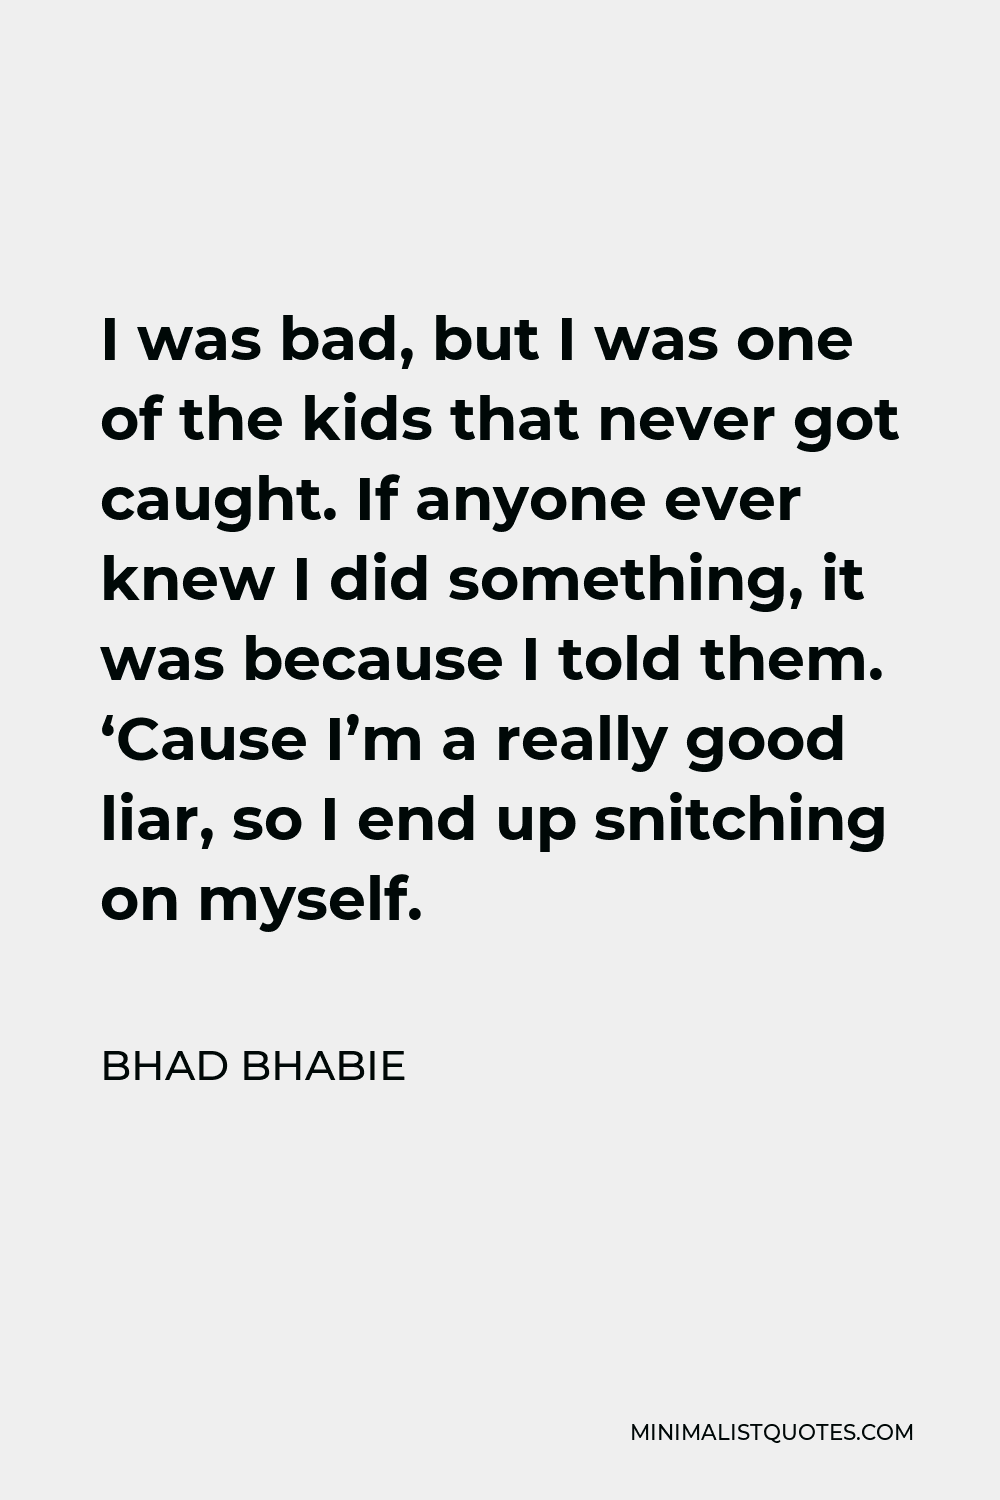 Bhad Bhabie Quote - I was bad, but I was one of the kids that never got caught. If anyone ever knew I did something, it was because I told them. ‘Cause I’m a really good liar, so I end up snitching on myself.